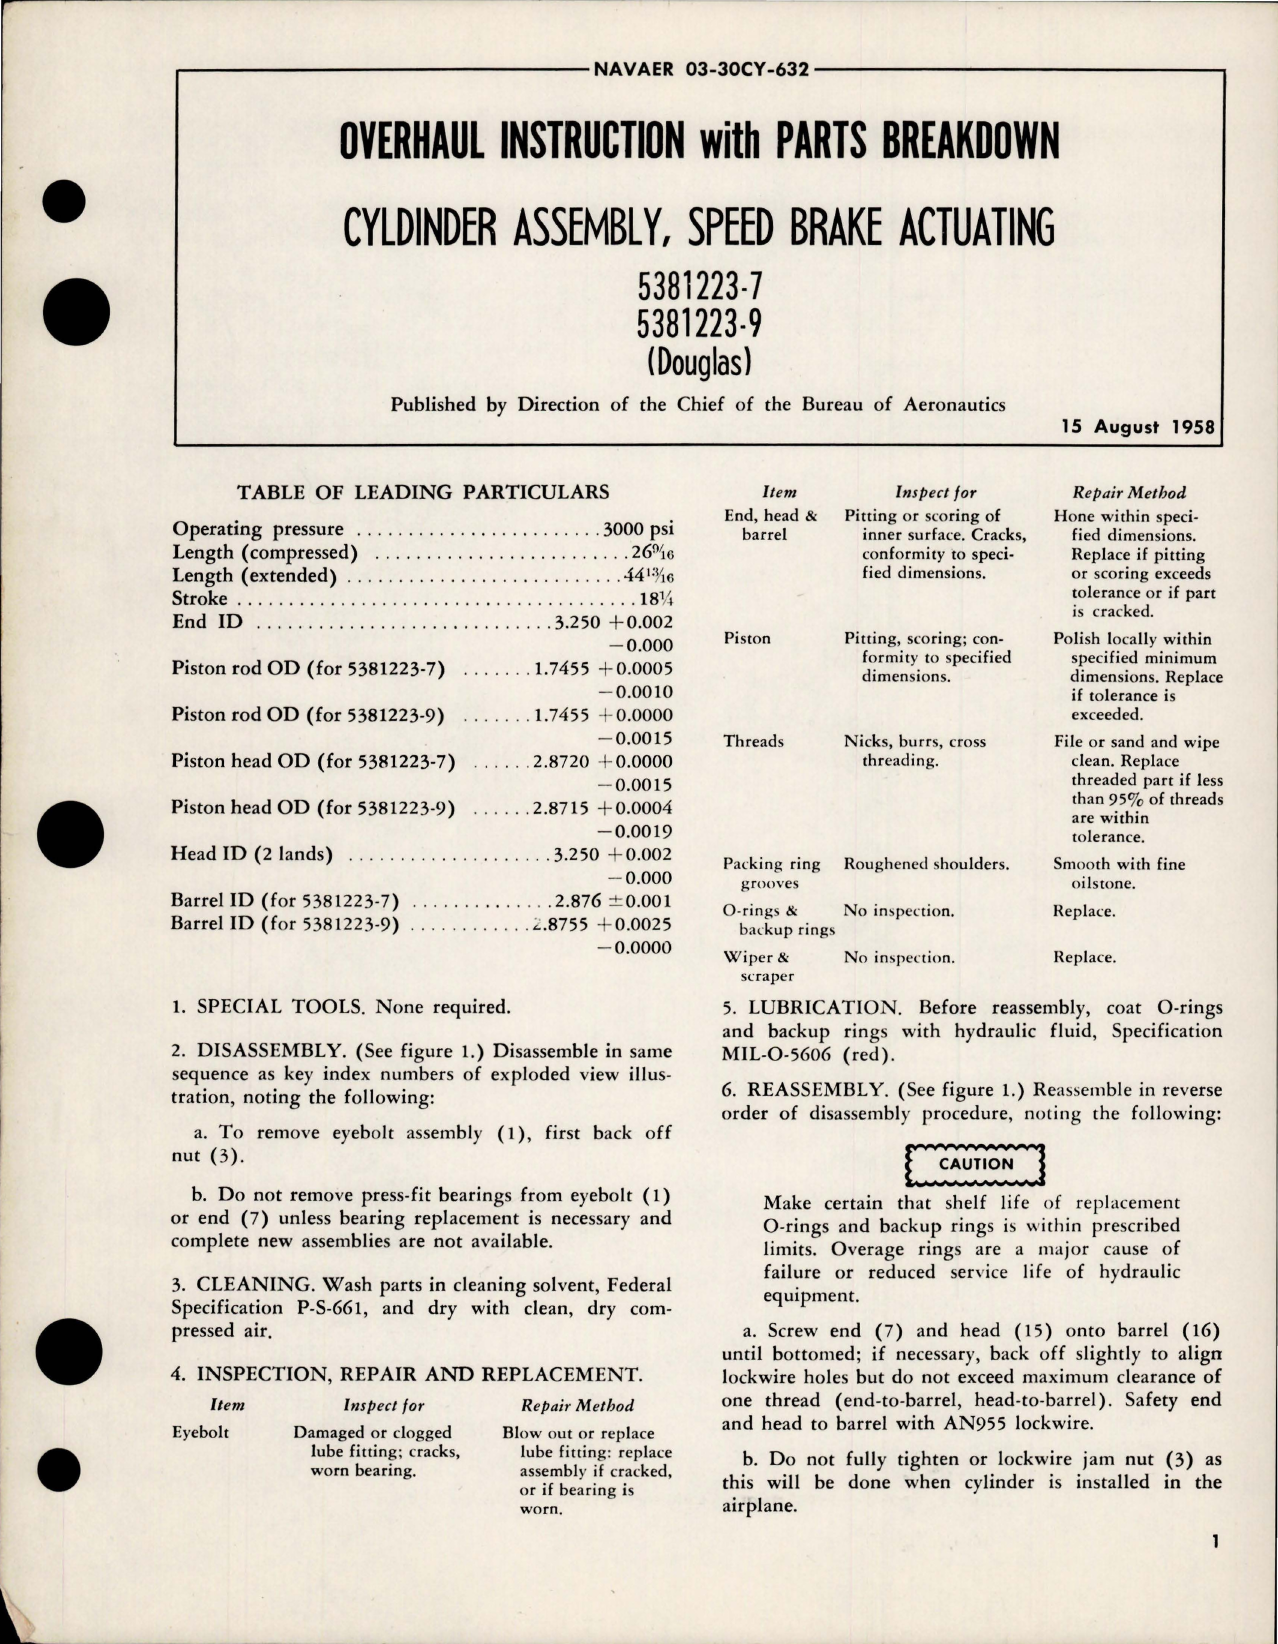 Sample page 1 from AirCorps Library document: Overhaul Instruction with Parts Breakdown for Speed Brake Actuating Cylinder Assembly - 5381223-7, 5381223-9